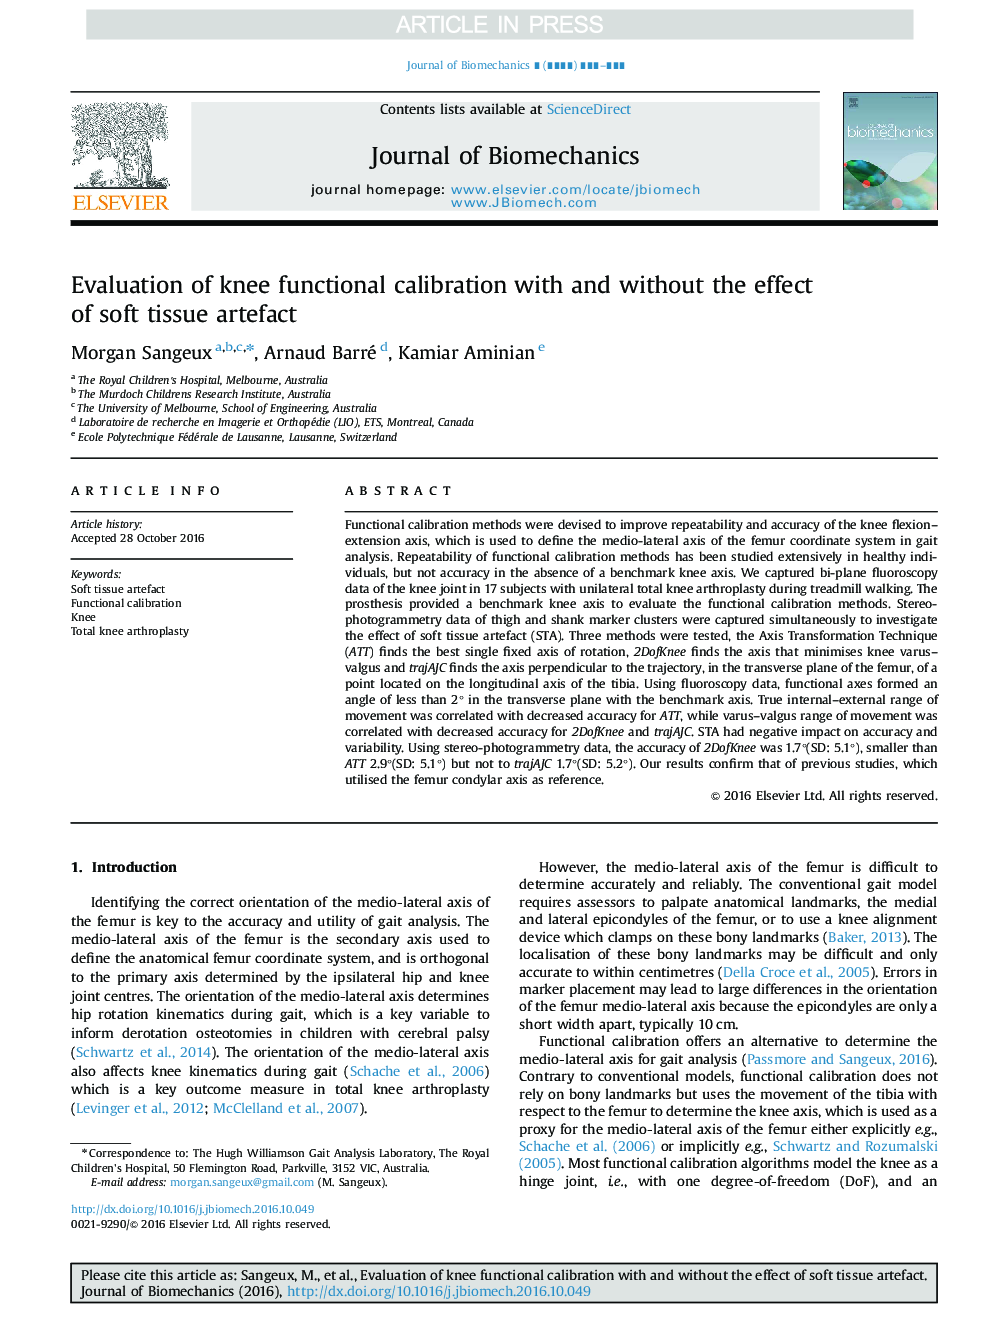 Evaluation of knee functional calibration with and without the effect of soft tissue artefact